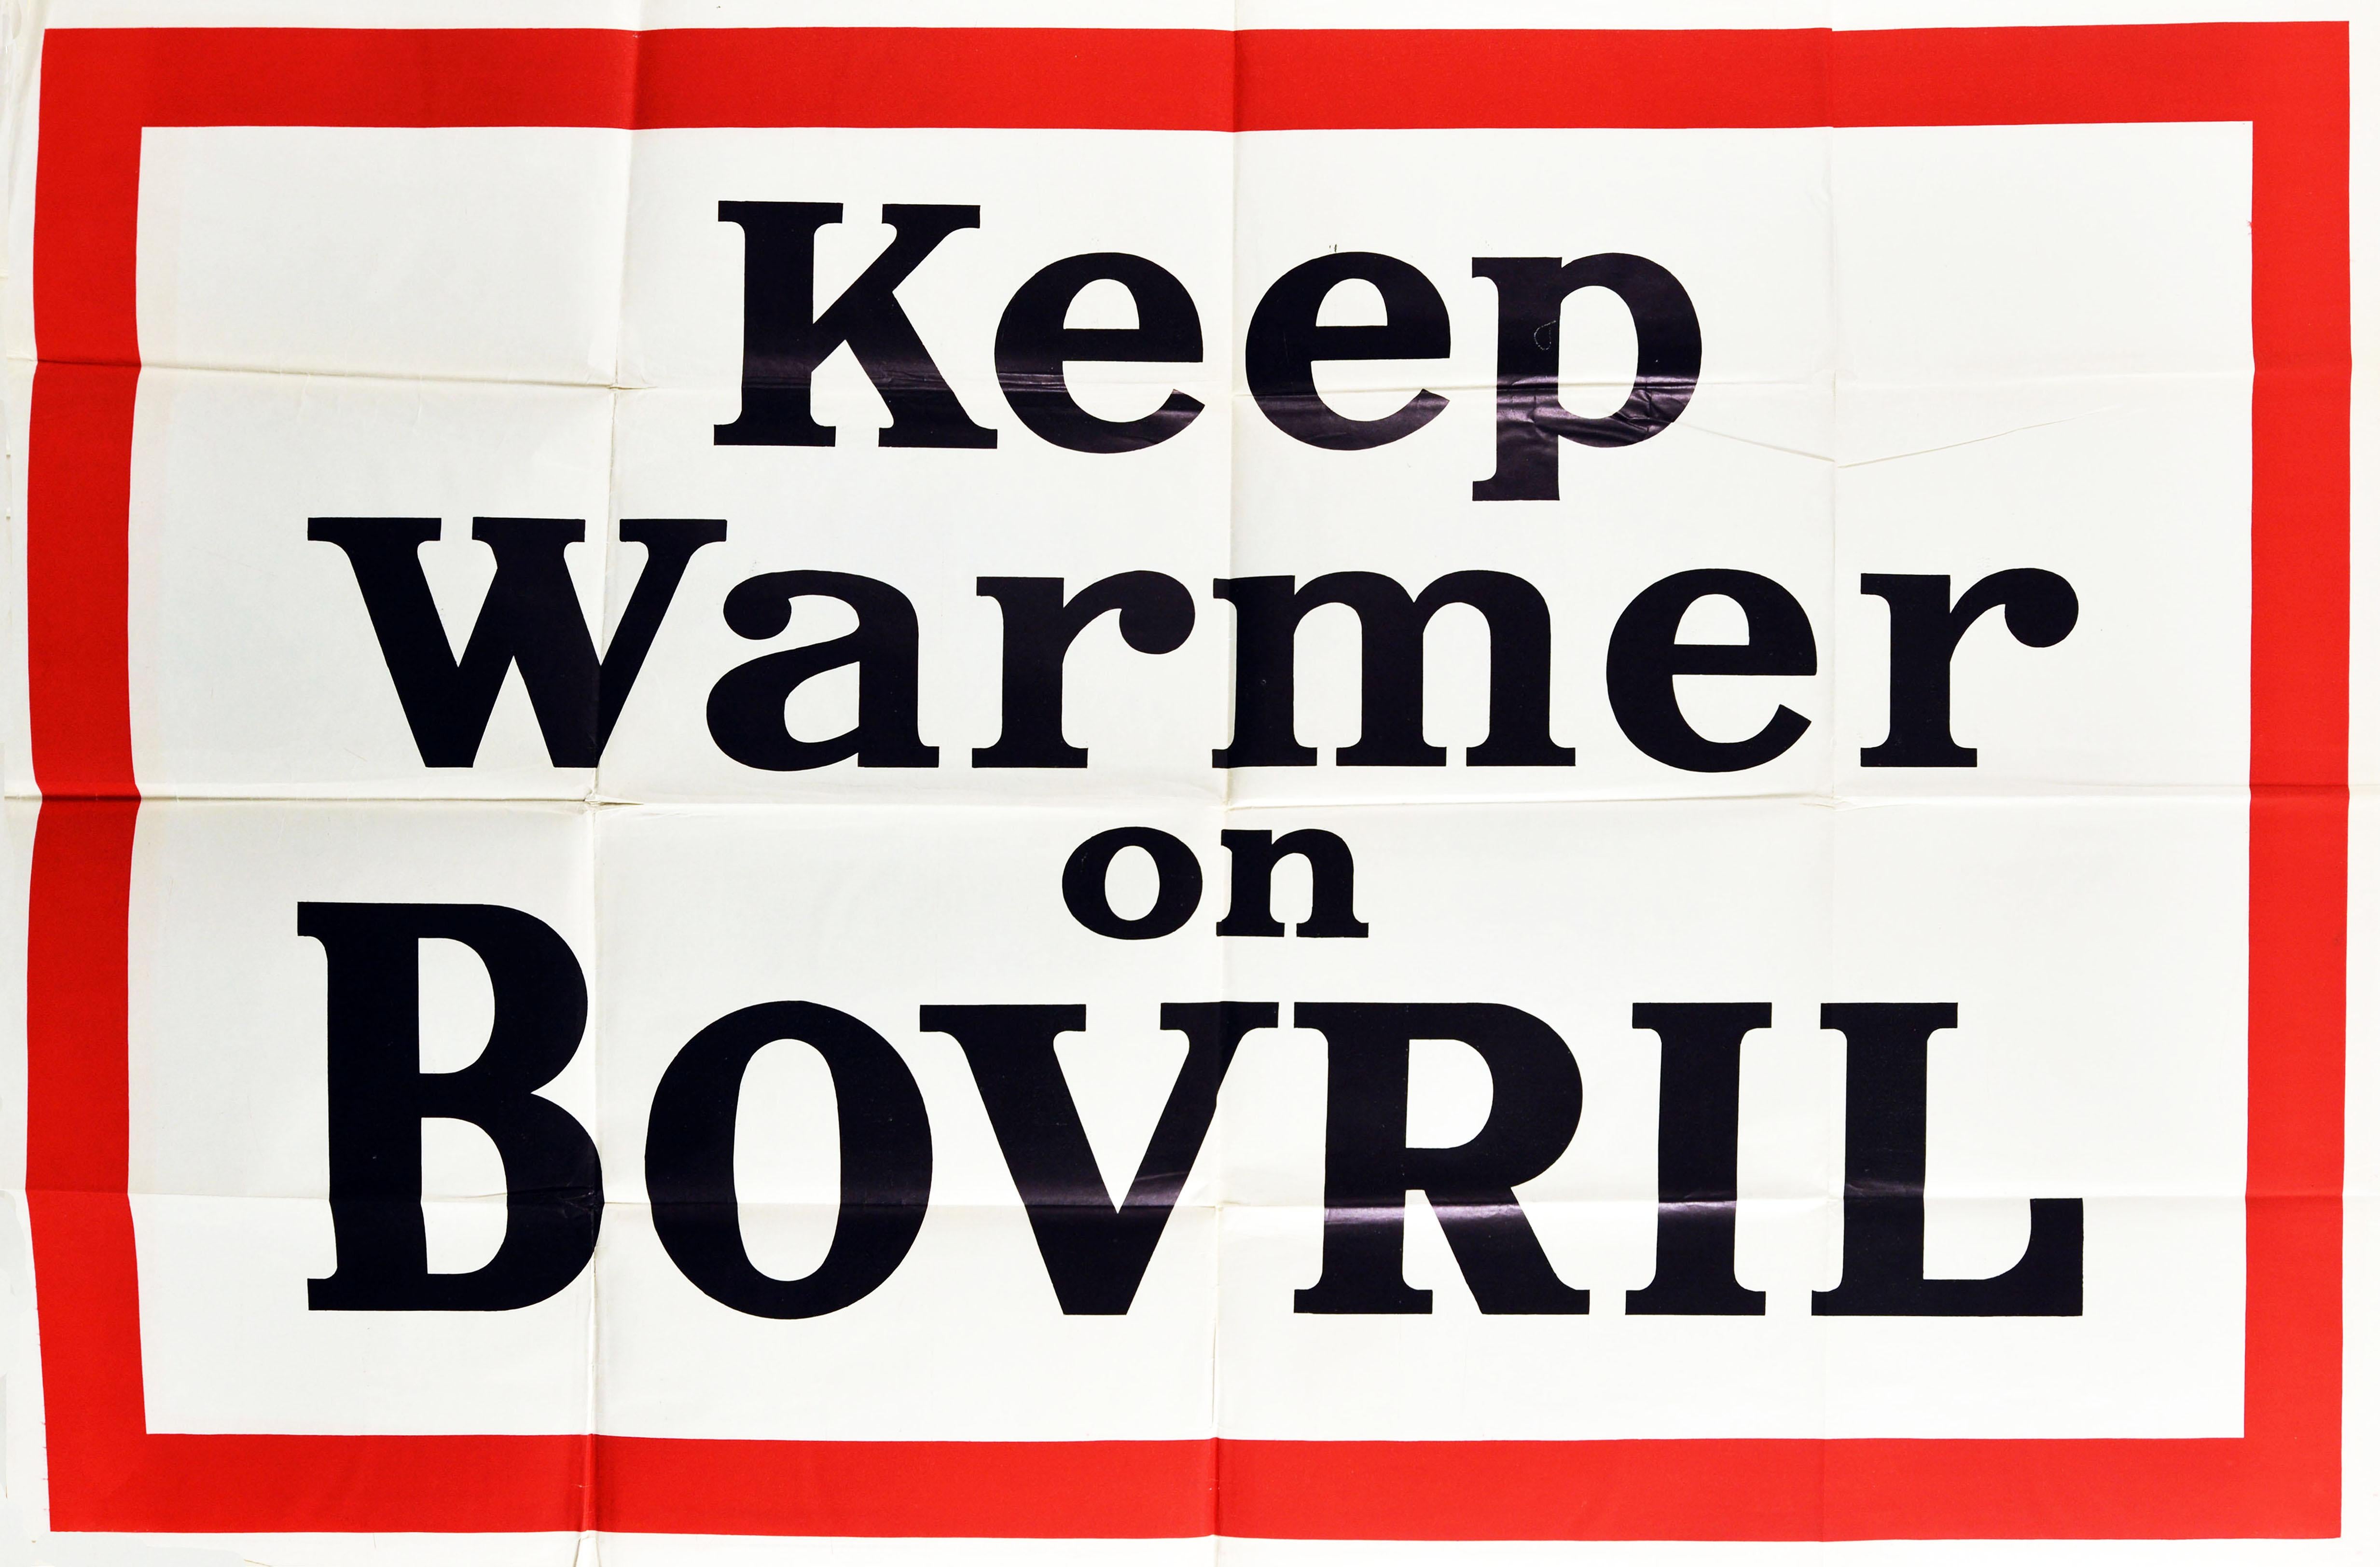 Original vintage food advertising poster for Bovril - Keep Warmer on Bovril - featuring bold black lettering on a white background in a red frame border. Printed in Britain in the 1930s, this campaign used puns and word play to resemble the public